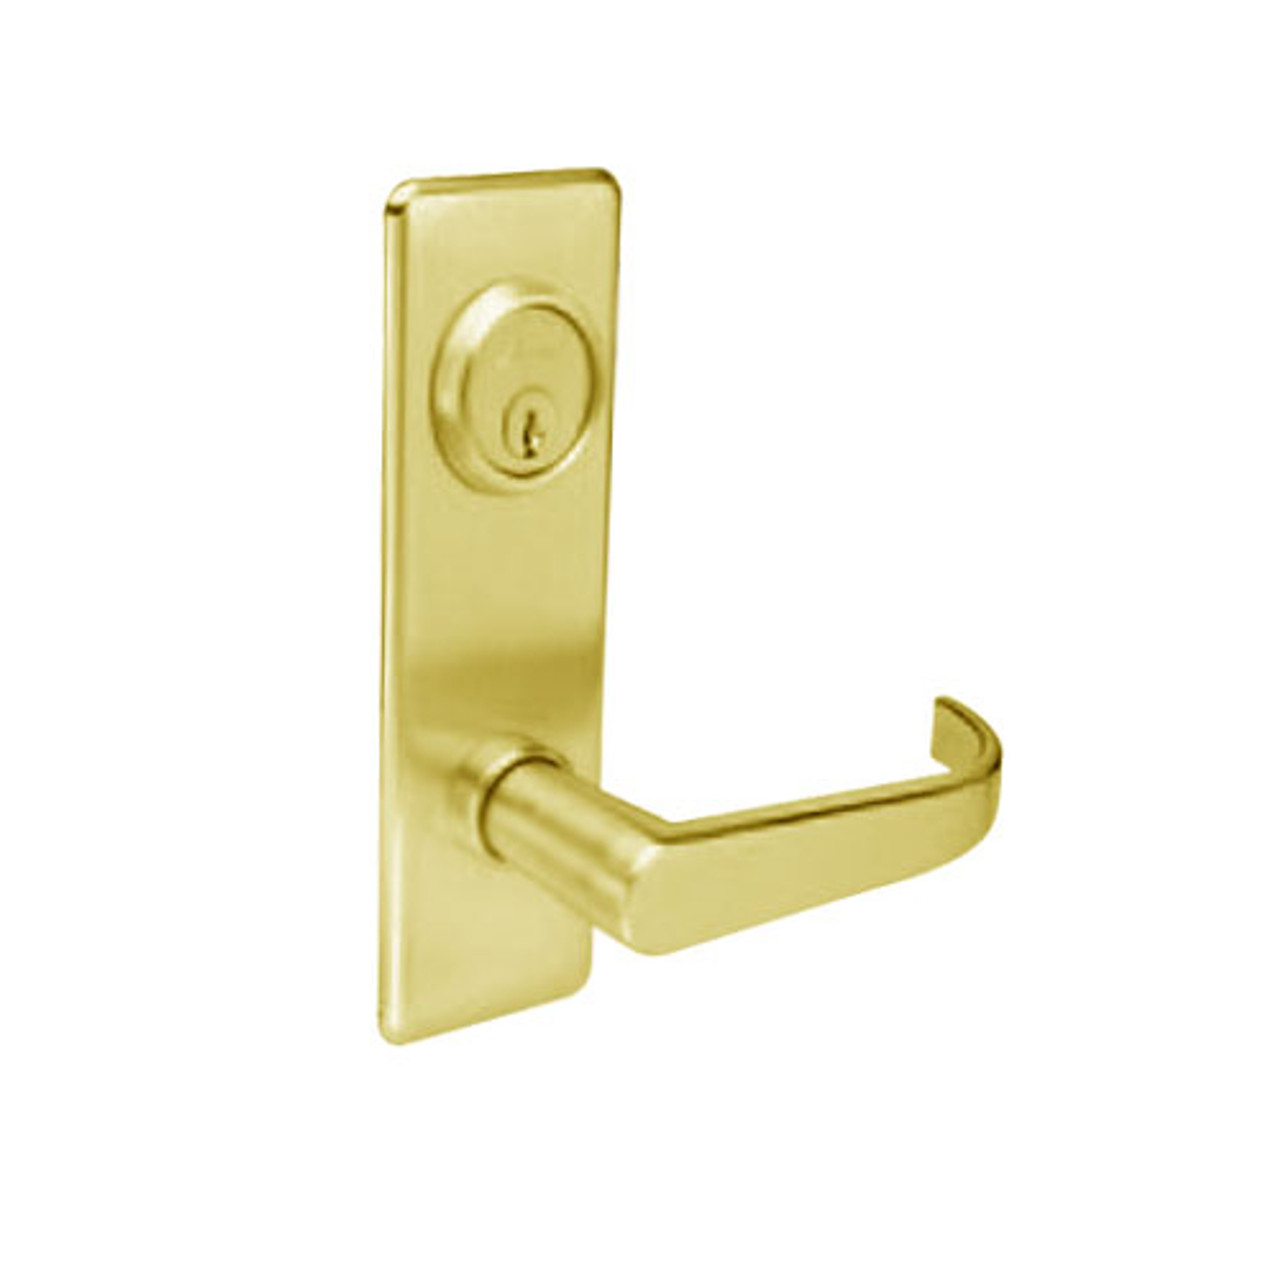 BM21-BRG-03 Arrow Mortise Lock BM Series Entrance Lever with Broadway Design and G Escutcheon in Bright Brass